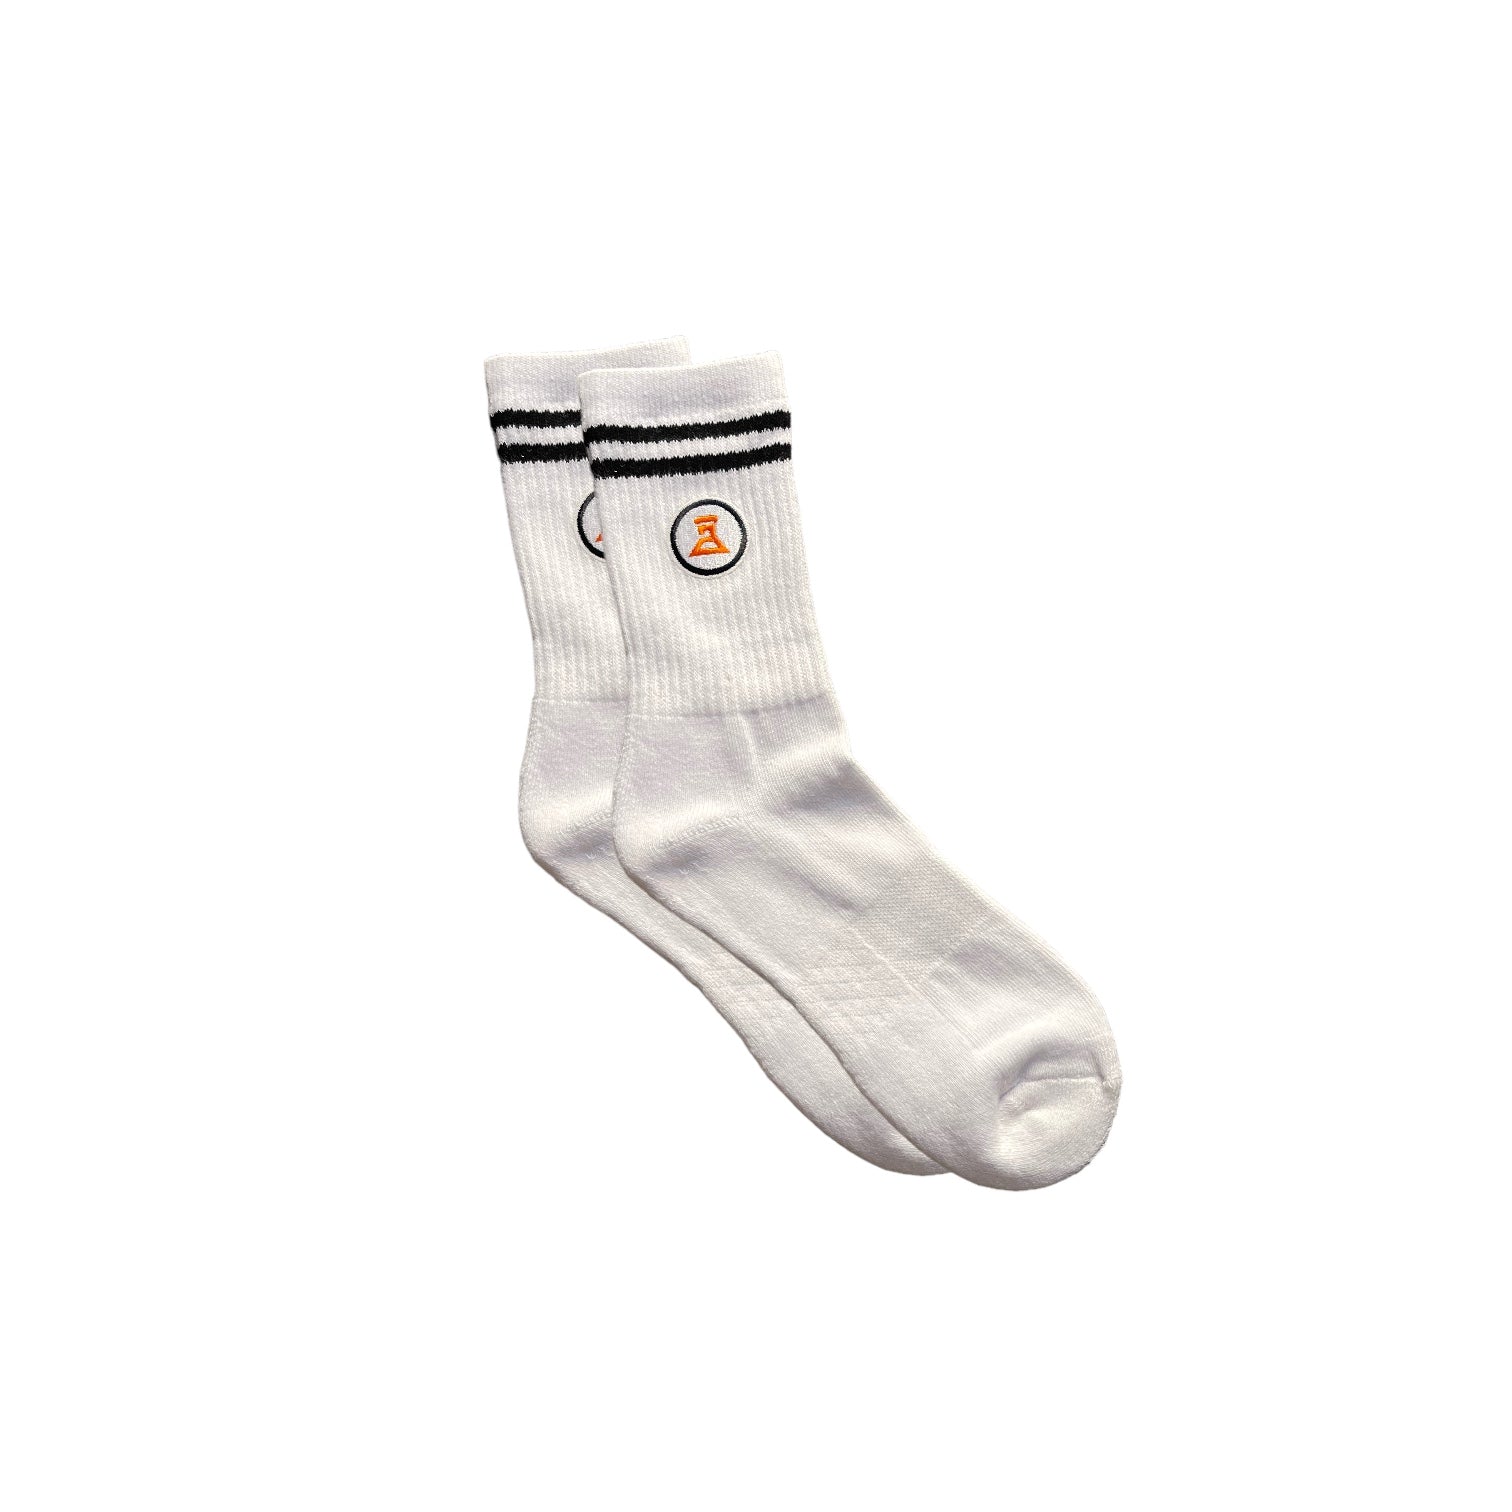 Dlab Socks (High) white qith Black lines and Embroidered Patch